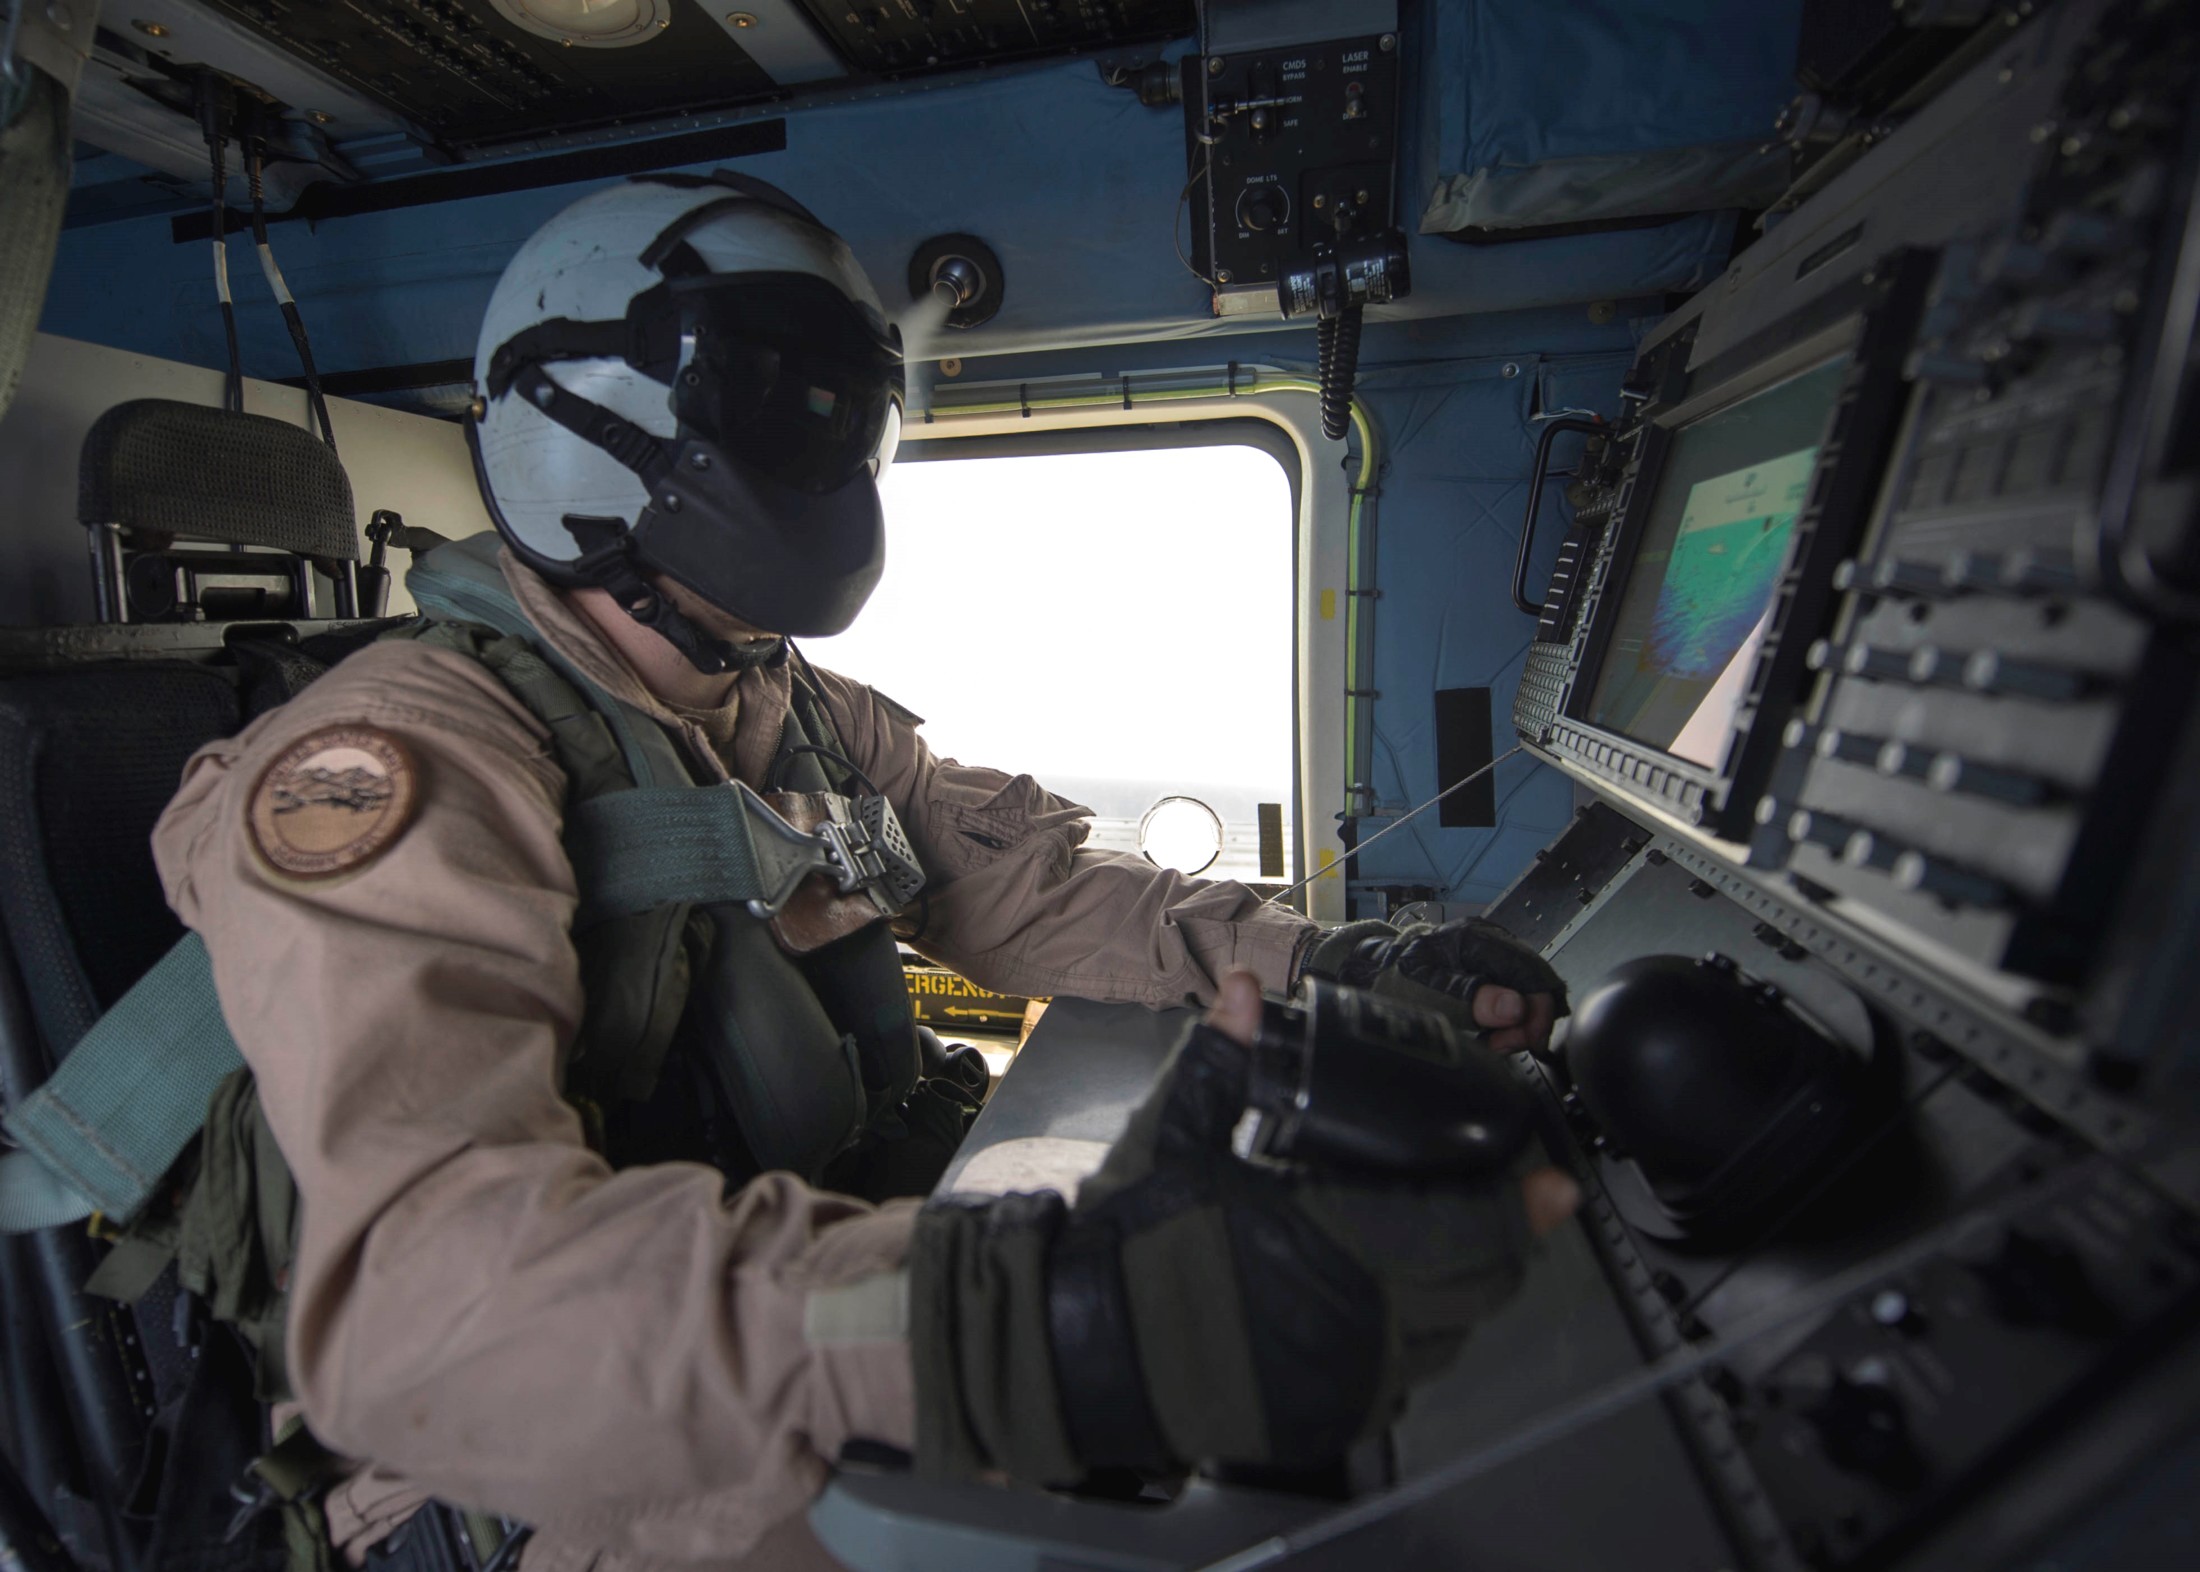 hsm-73 battlecats helicopter maritime strike squadron us navy mh-60r seahawk 2014 17 control panel